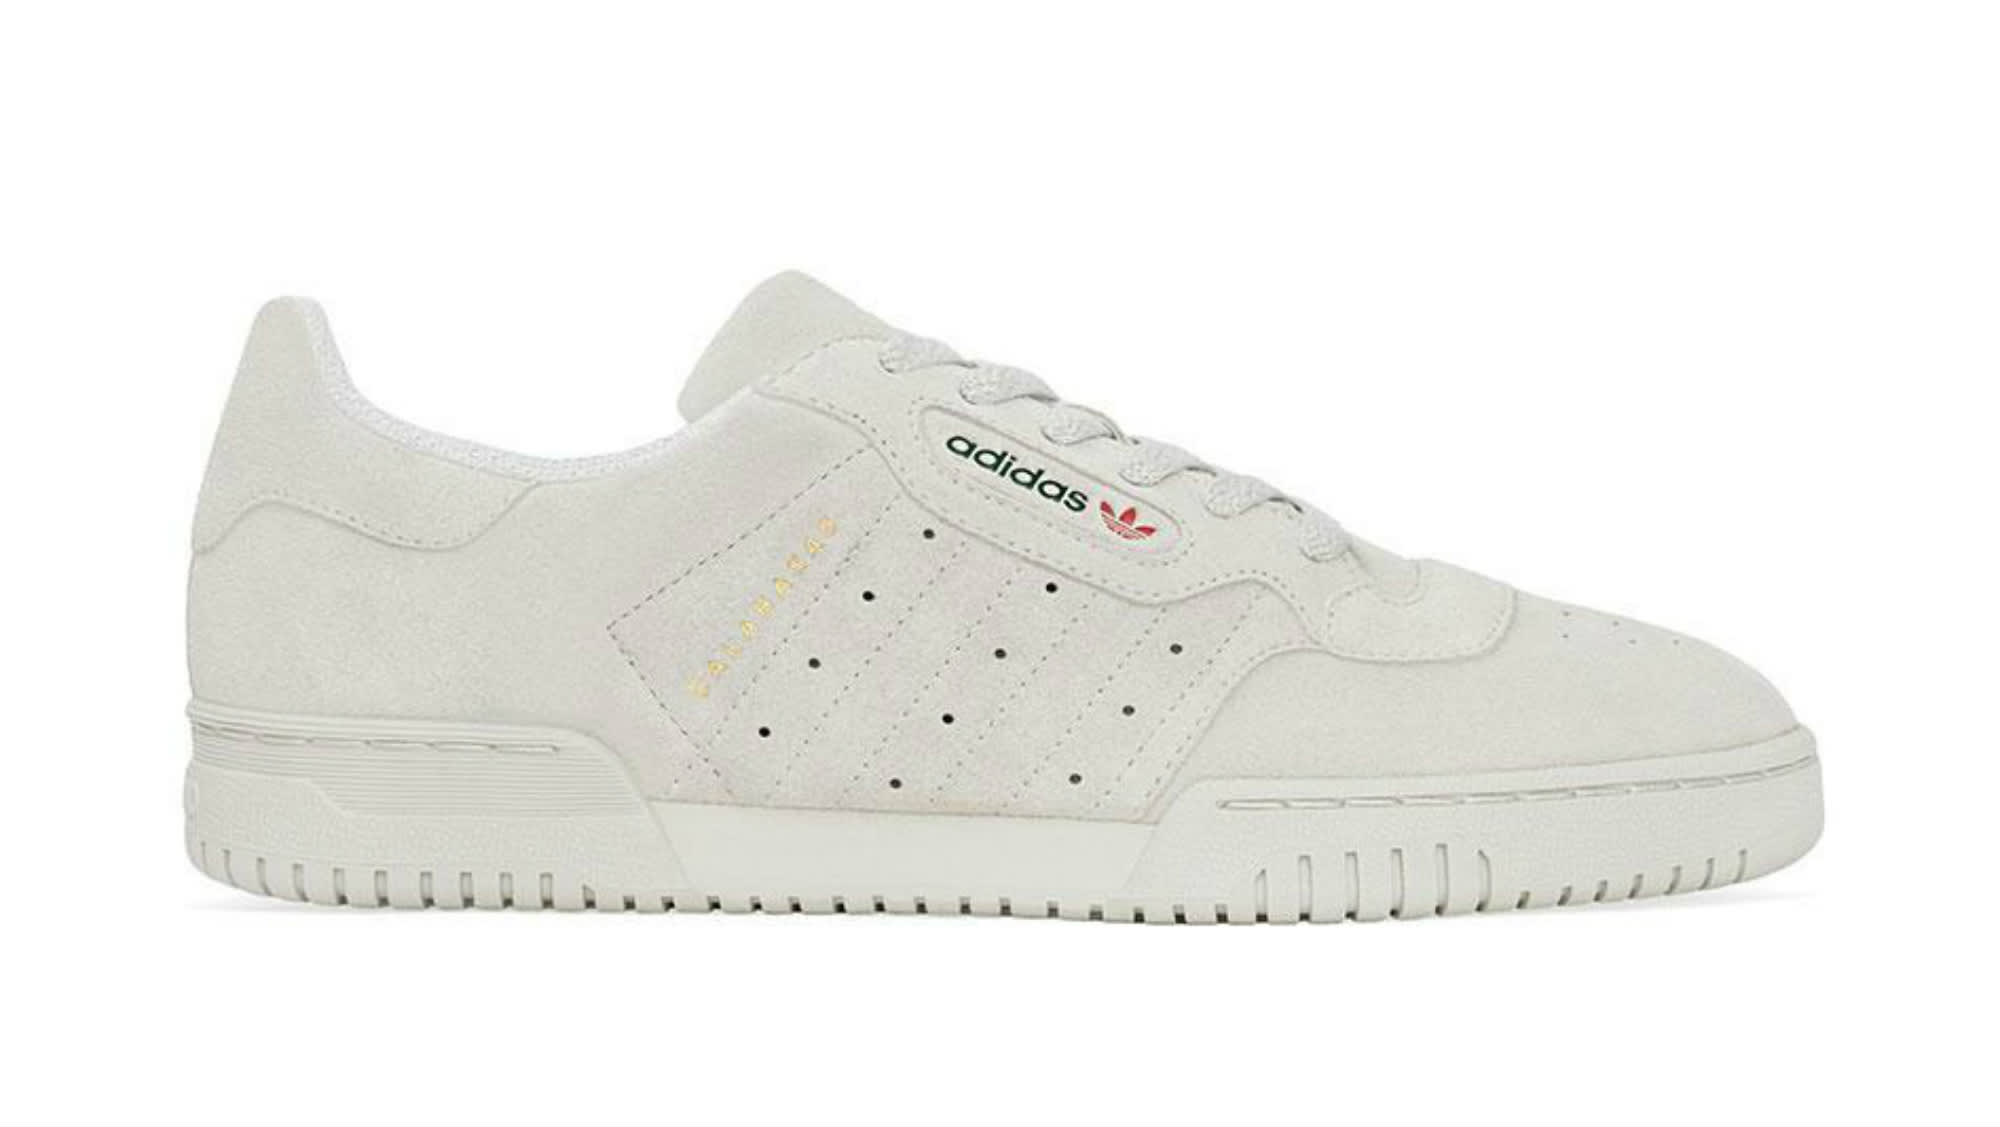 adidas-yeezy-powerphase-clear-brown-release-date